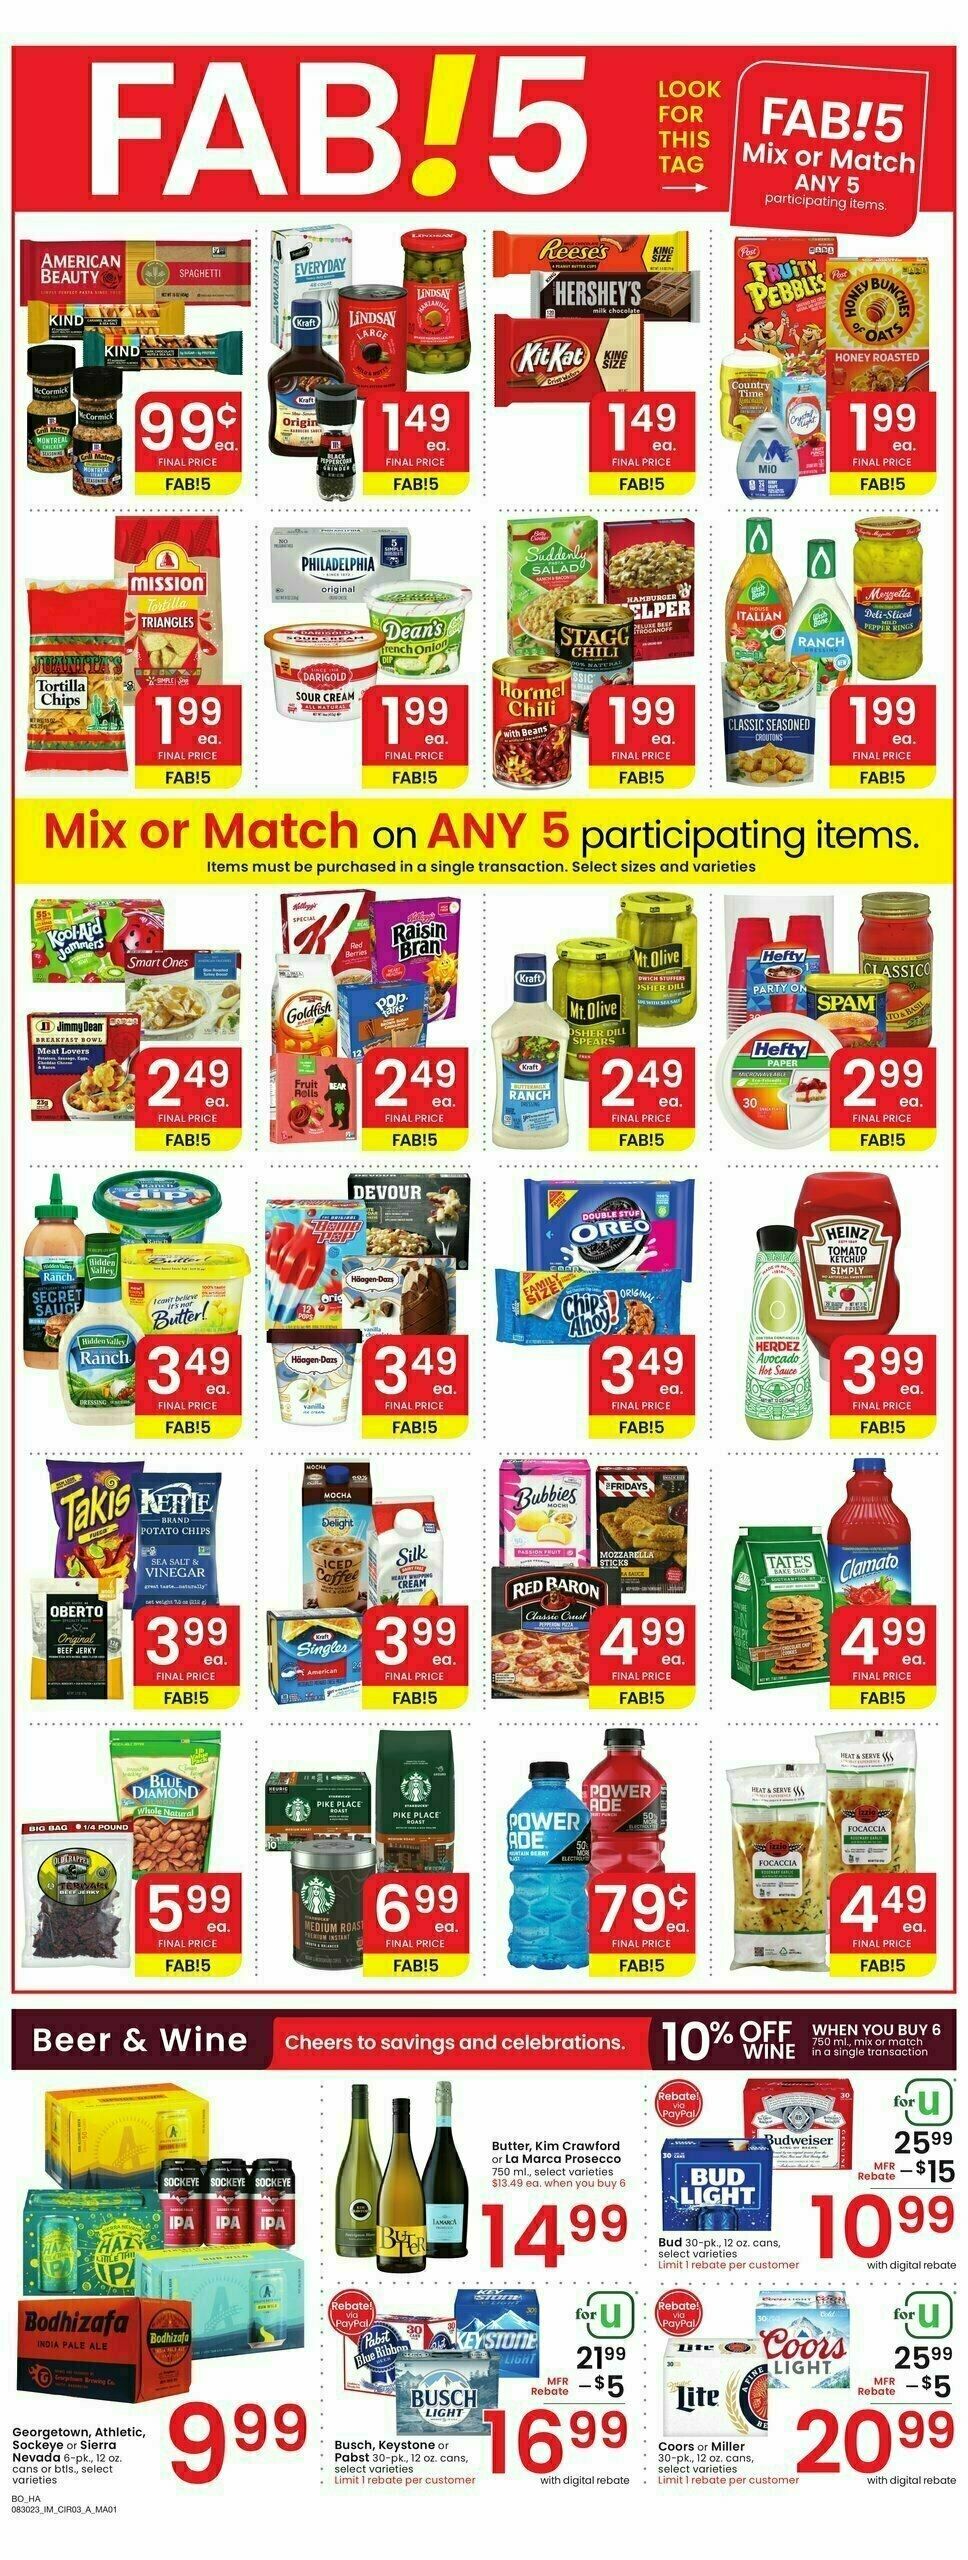 Albertsons Weekly Ad from August 30